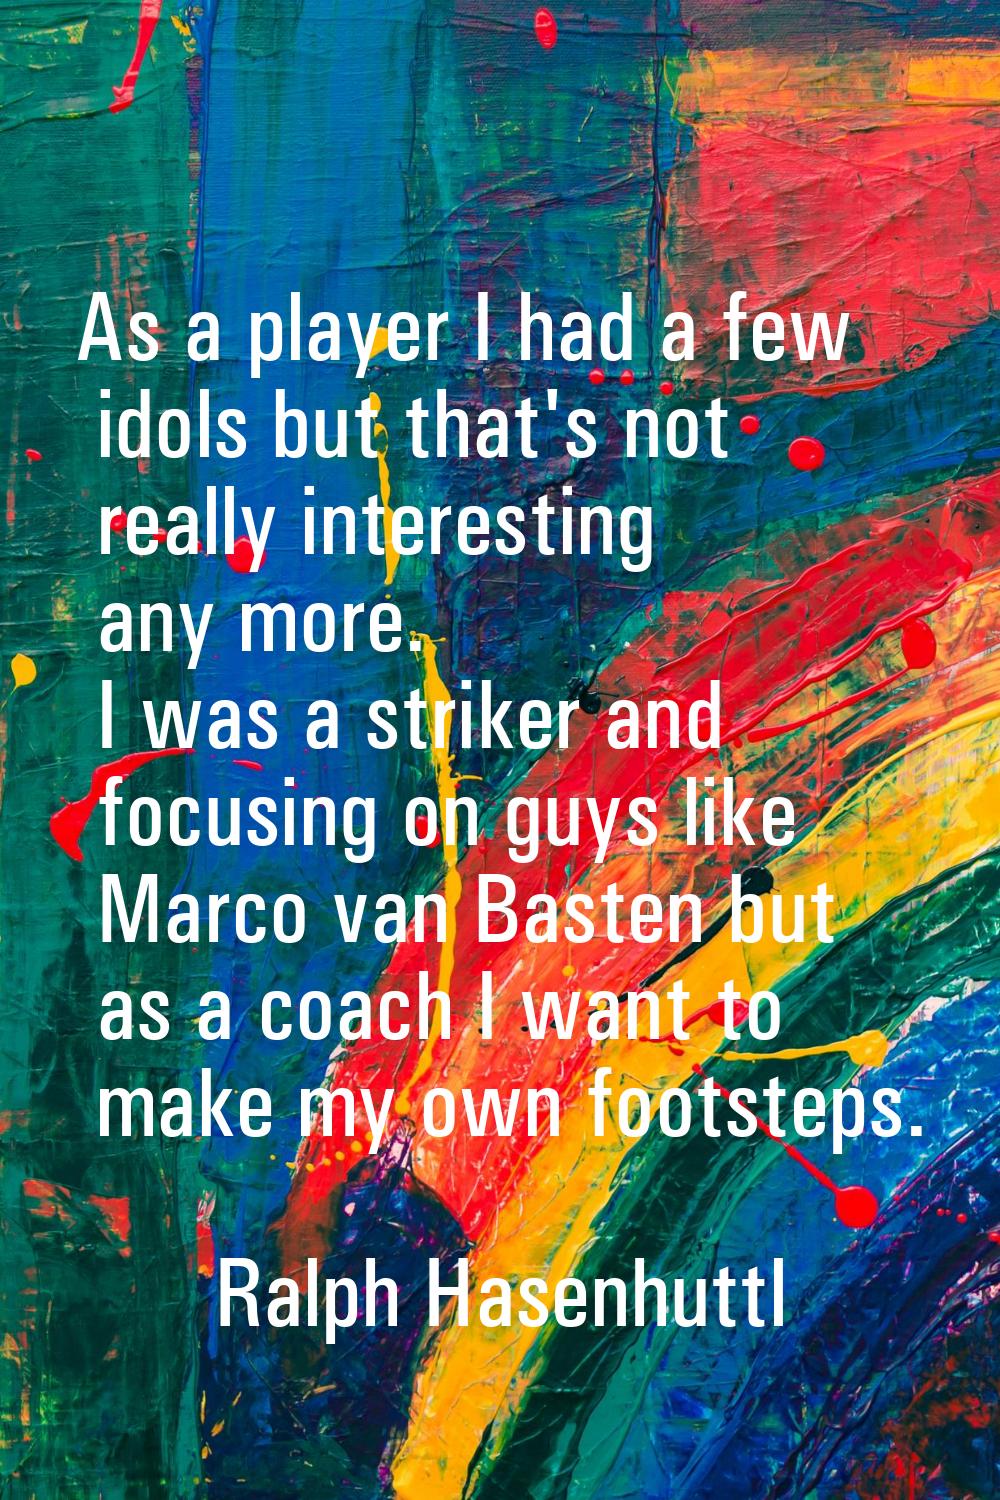 As a player I had a few idols but that's not really interesting any more. I was a striker and focus